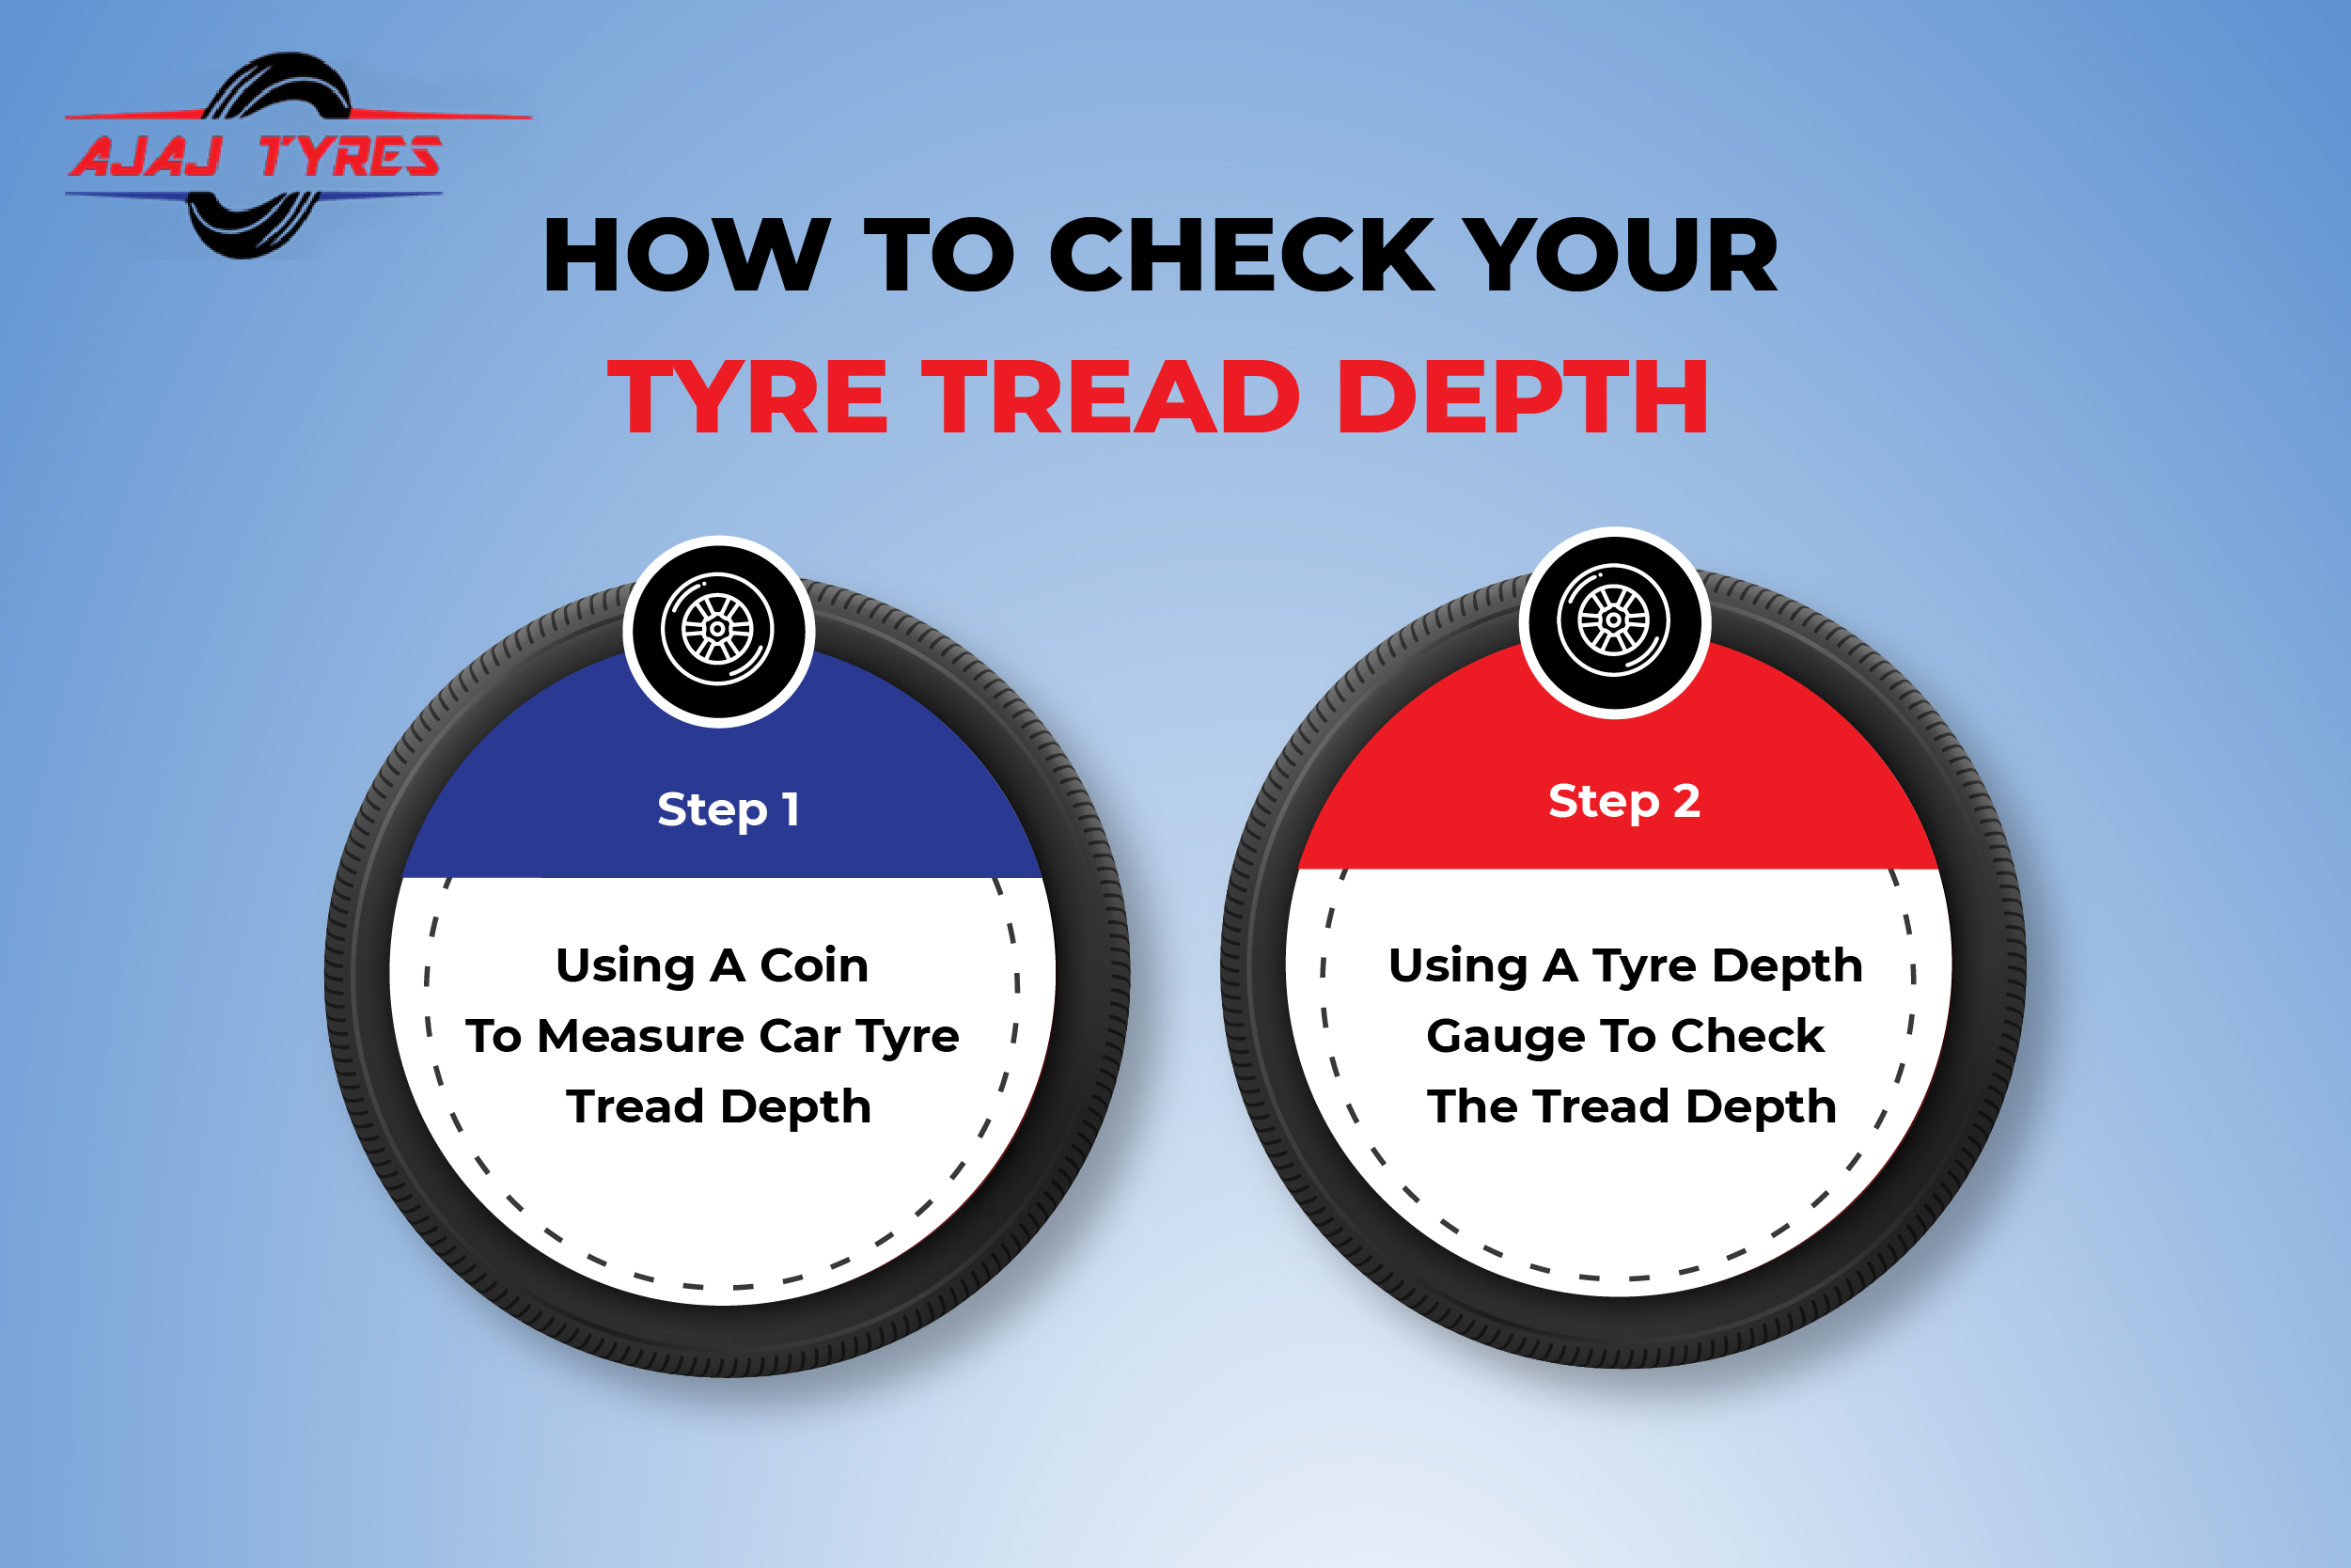 How To Check Your Tyre Tread Depth